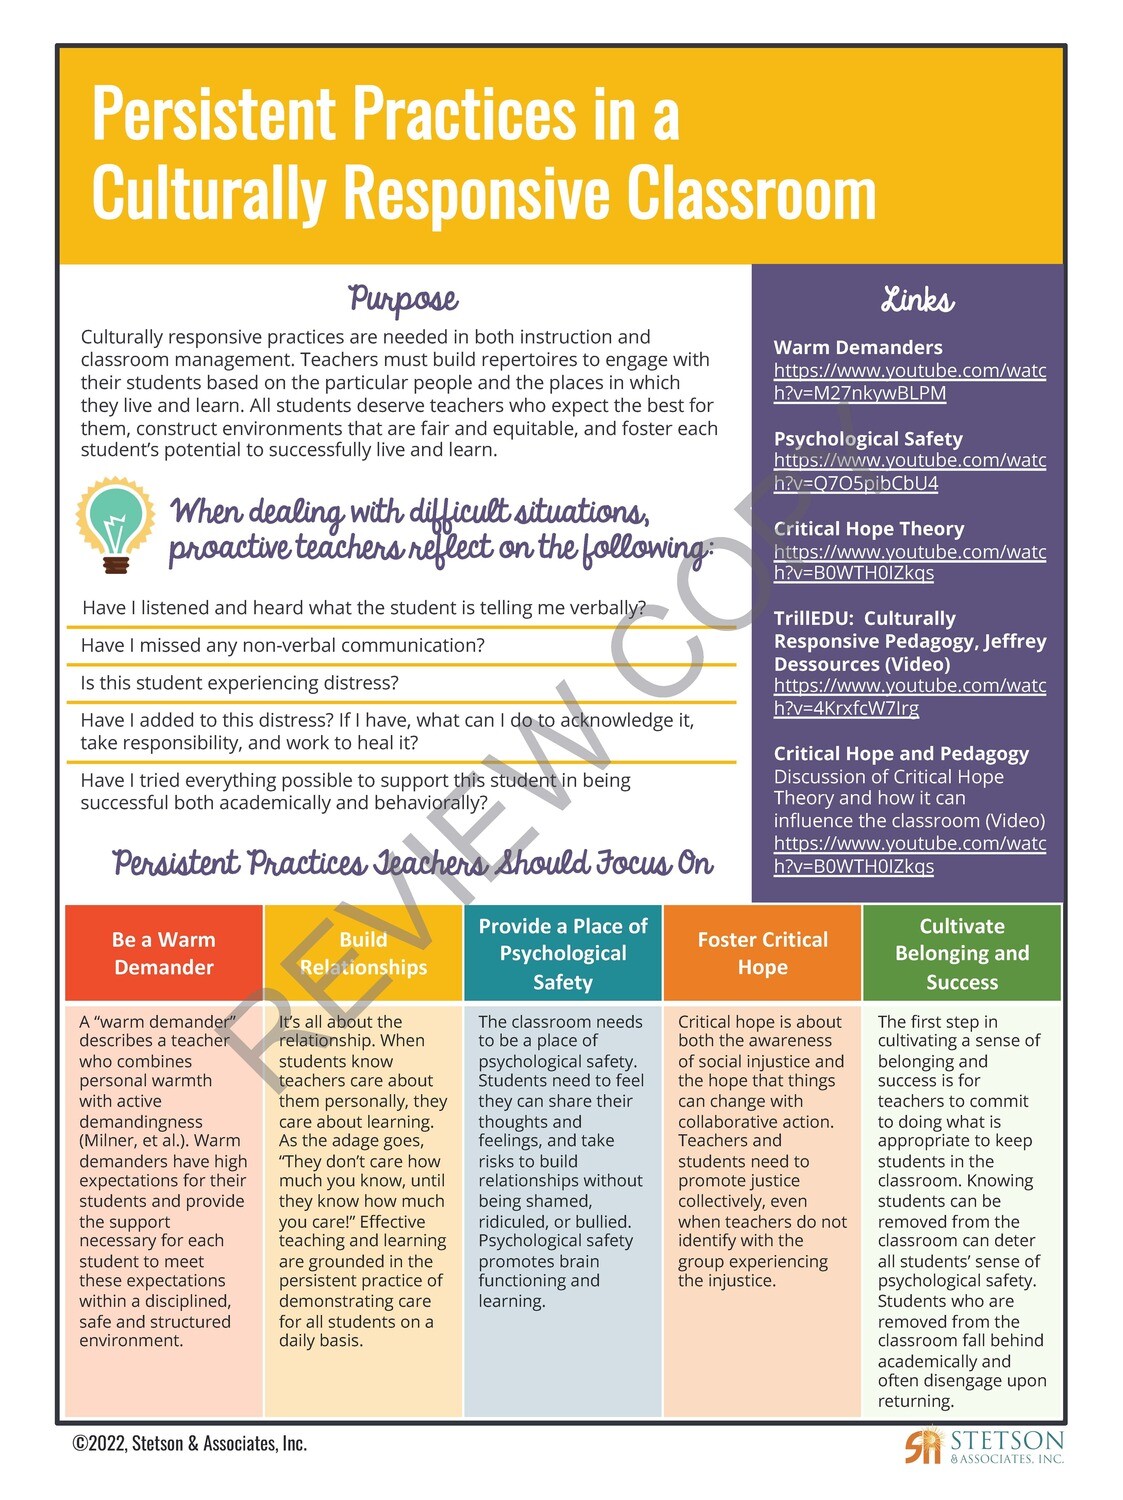 Persistent Practices in a Responsive Classroom